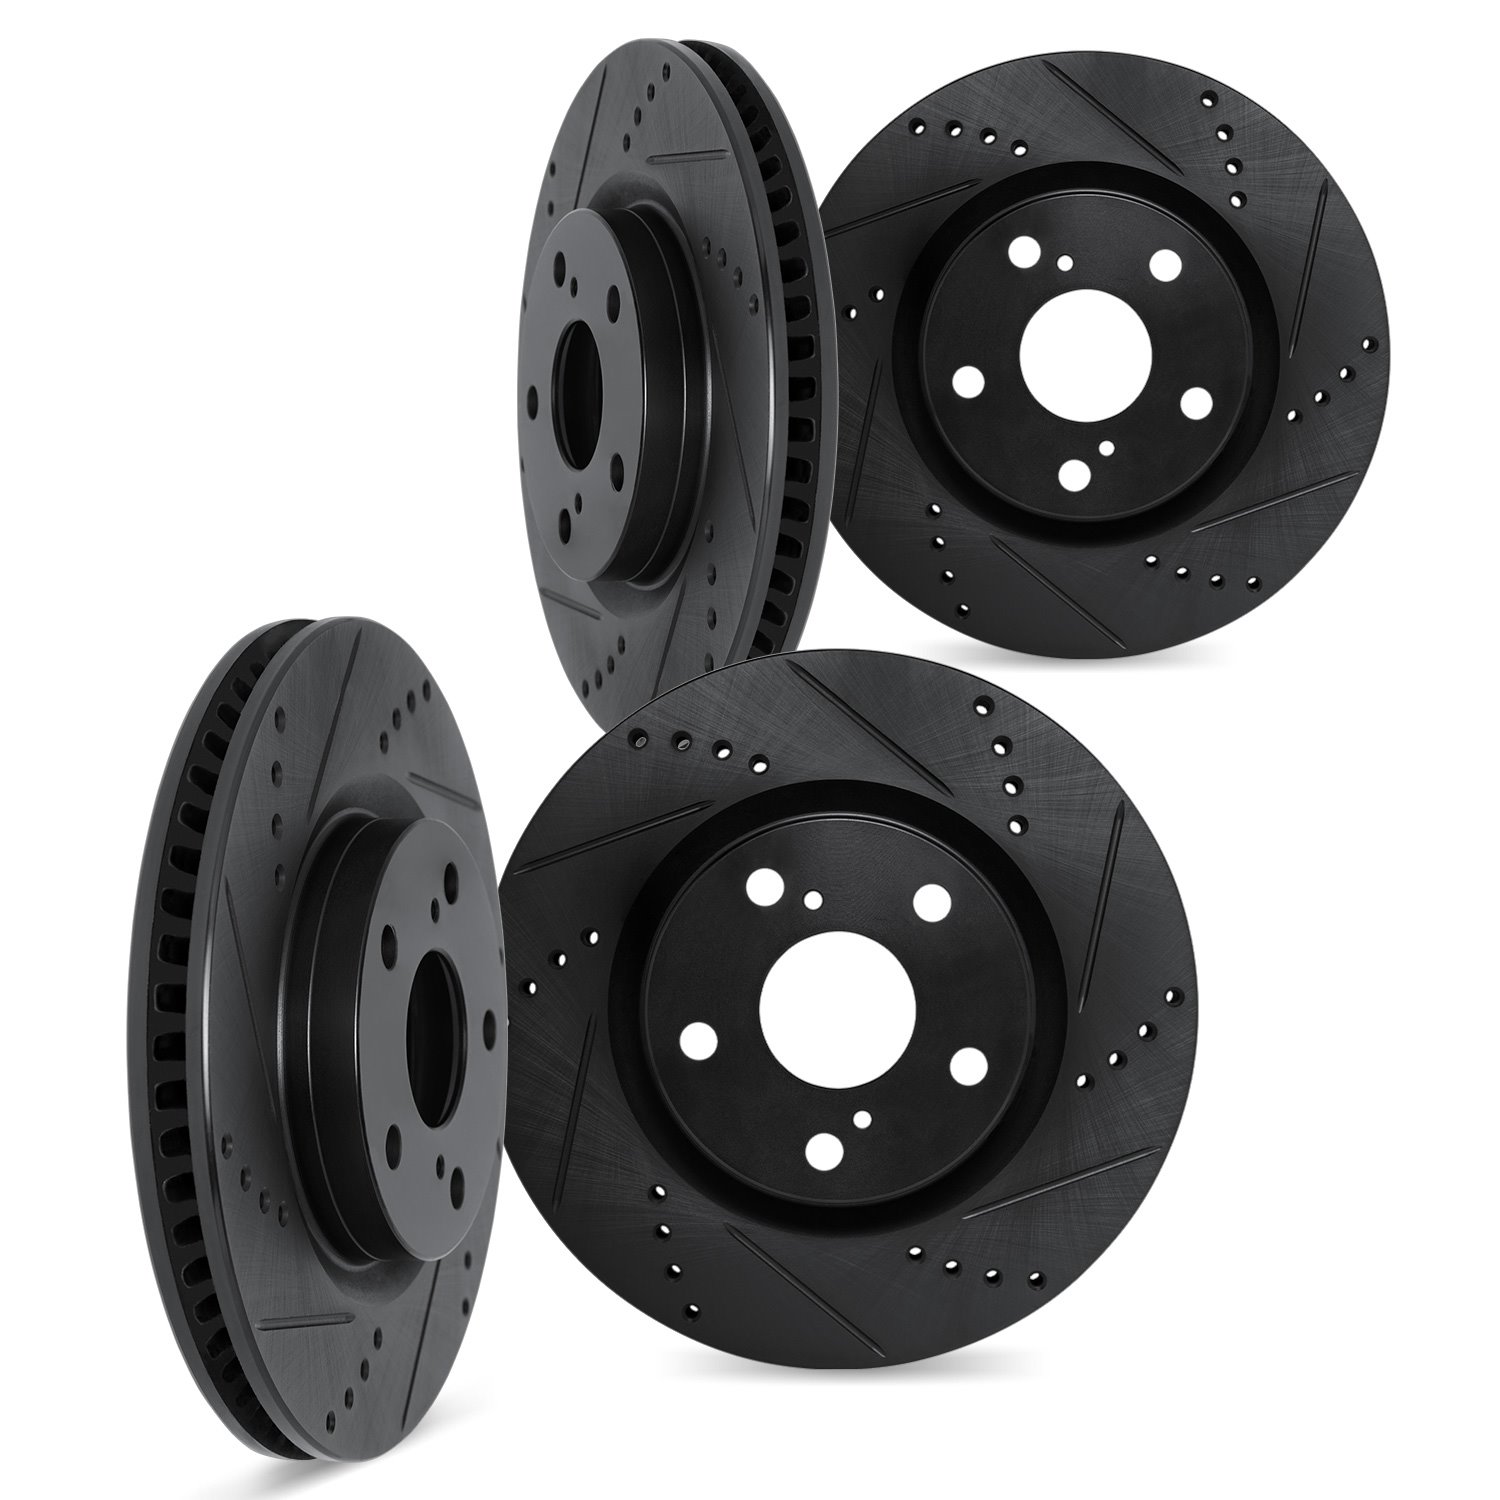 8004-31126 Drilled/Slotted Brake Rotors [Black], Fits Select BMW, Position: Front and Rear